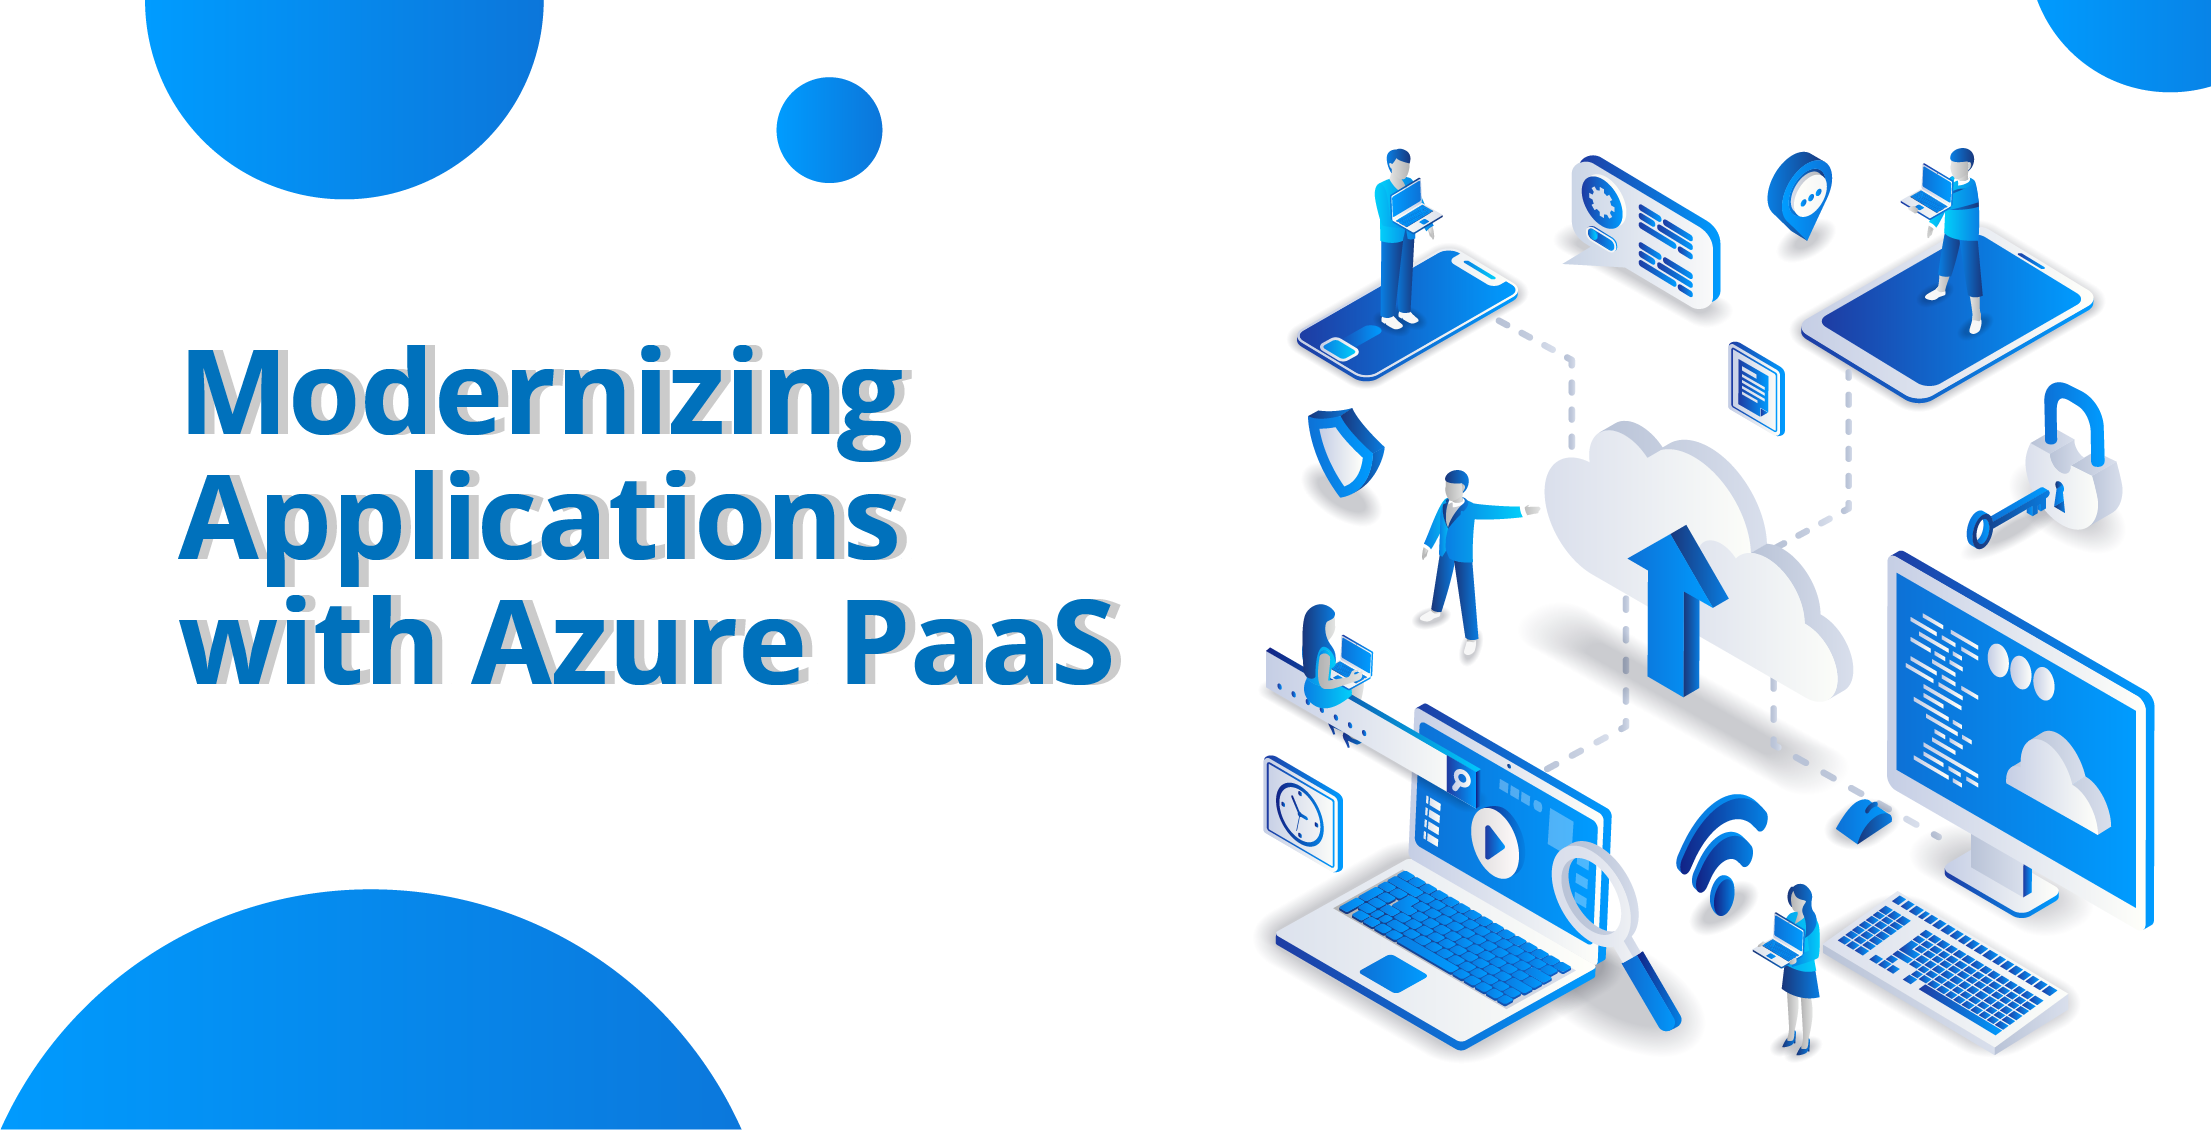 Modernizing-_Applications_with_Azure_PaaS-2 Modernizing Applications with Azure PaaS